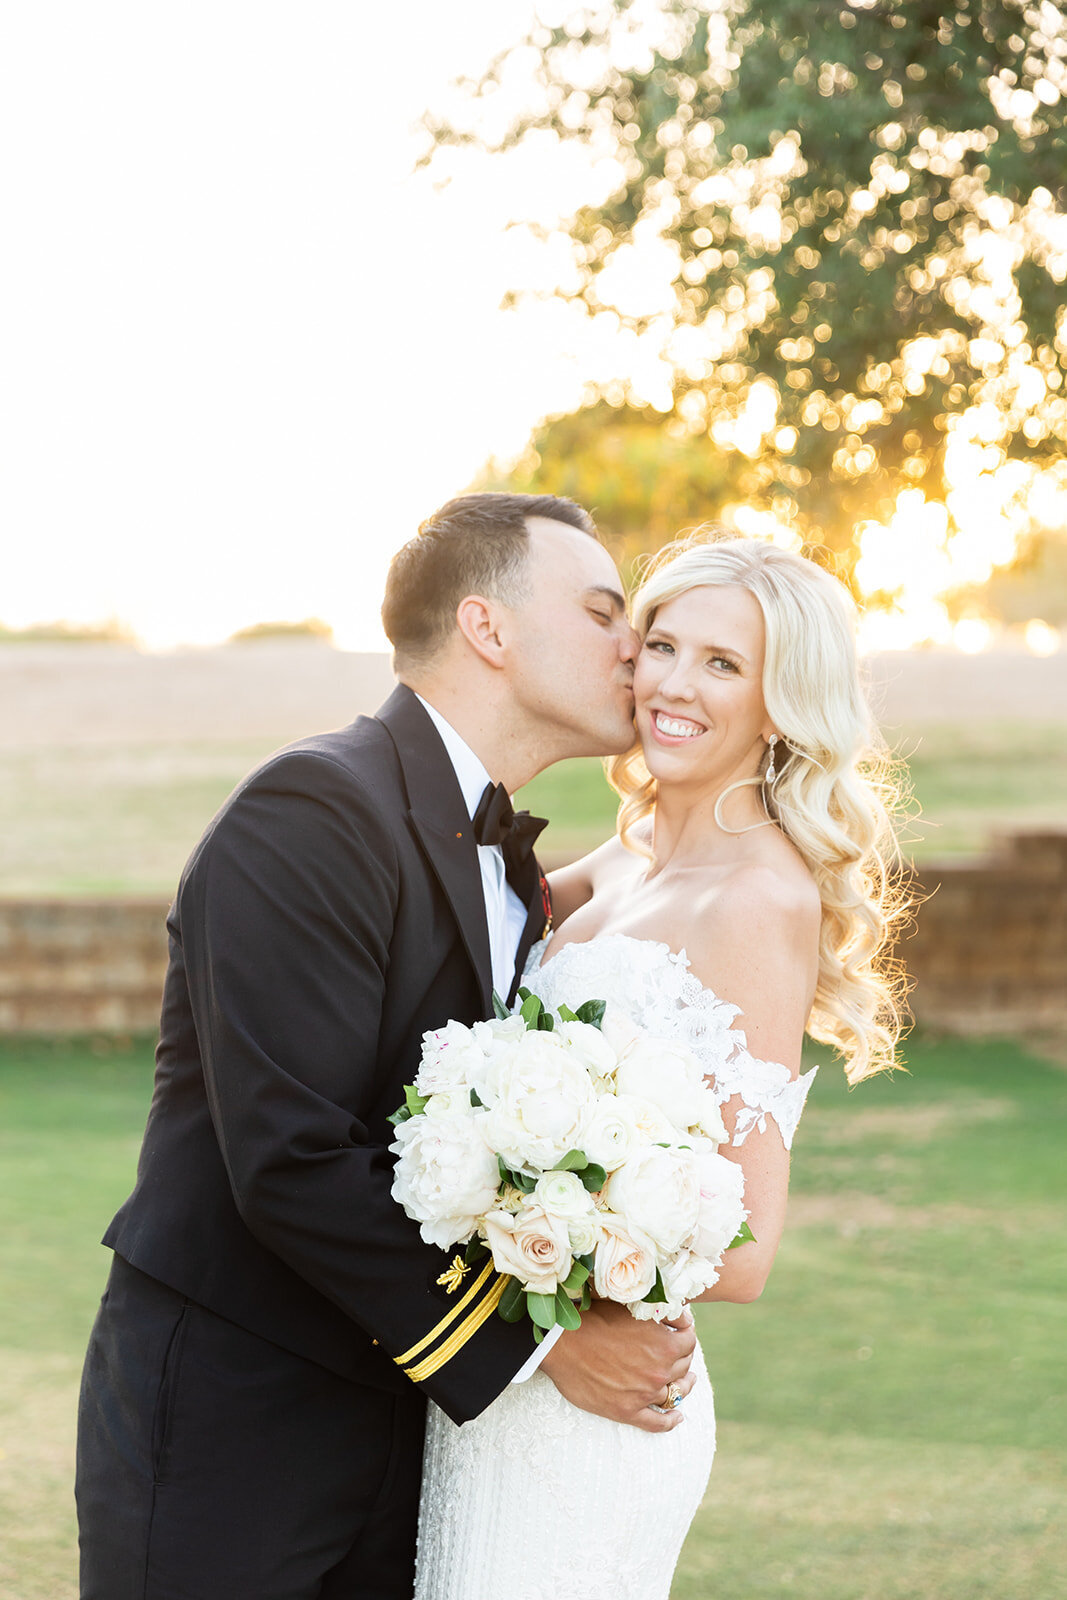 Karlie Colleen Photography - Holly & Ronnie Wedding - Seville Country Club - Gilbert Arizona-832